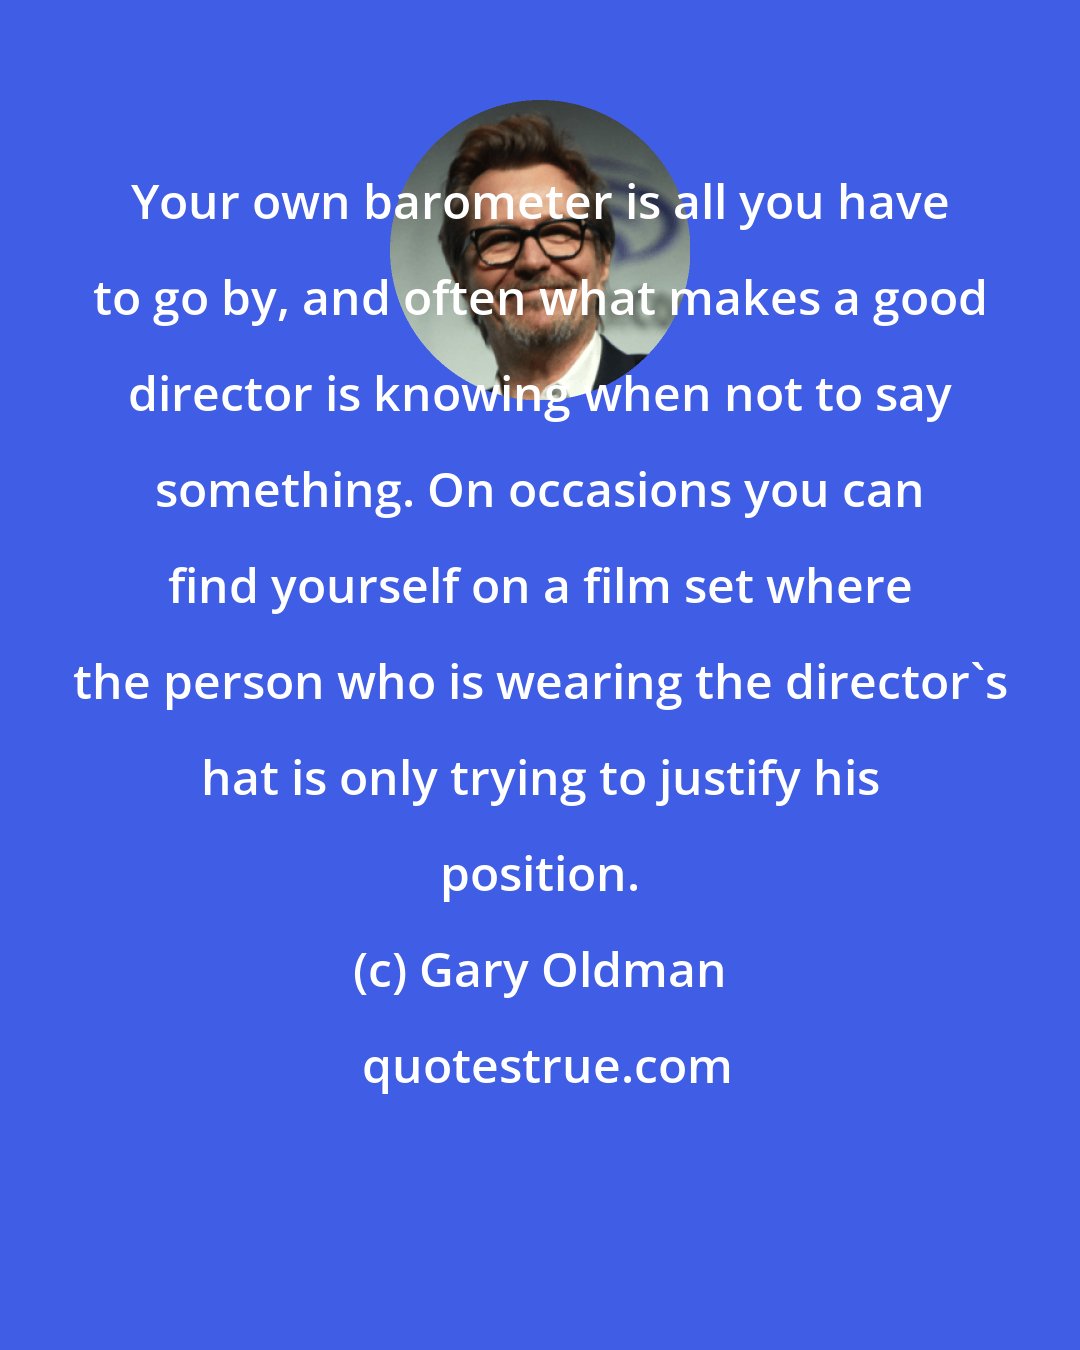 Gary Oldman: Your own barometer is all you have to go by, and often what makes a good director is knowing when not to say something. On occasions you can find yourself on a film set where the person who is wearing the director's hat is only trying to justify his position.